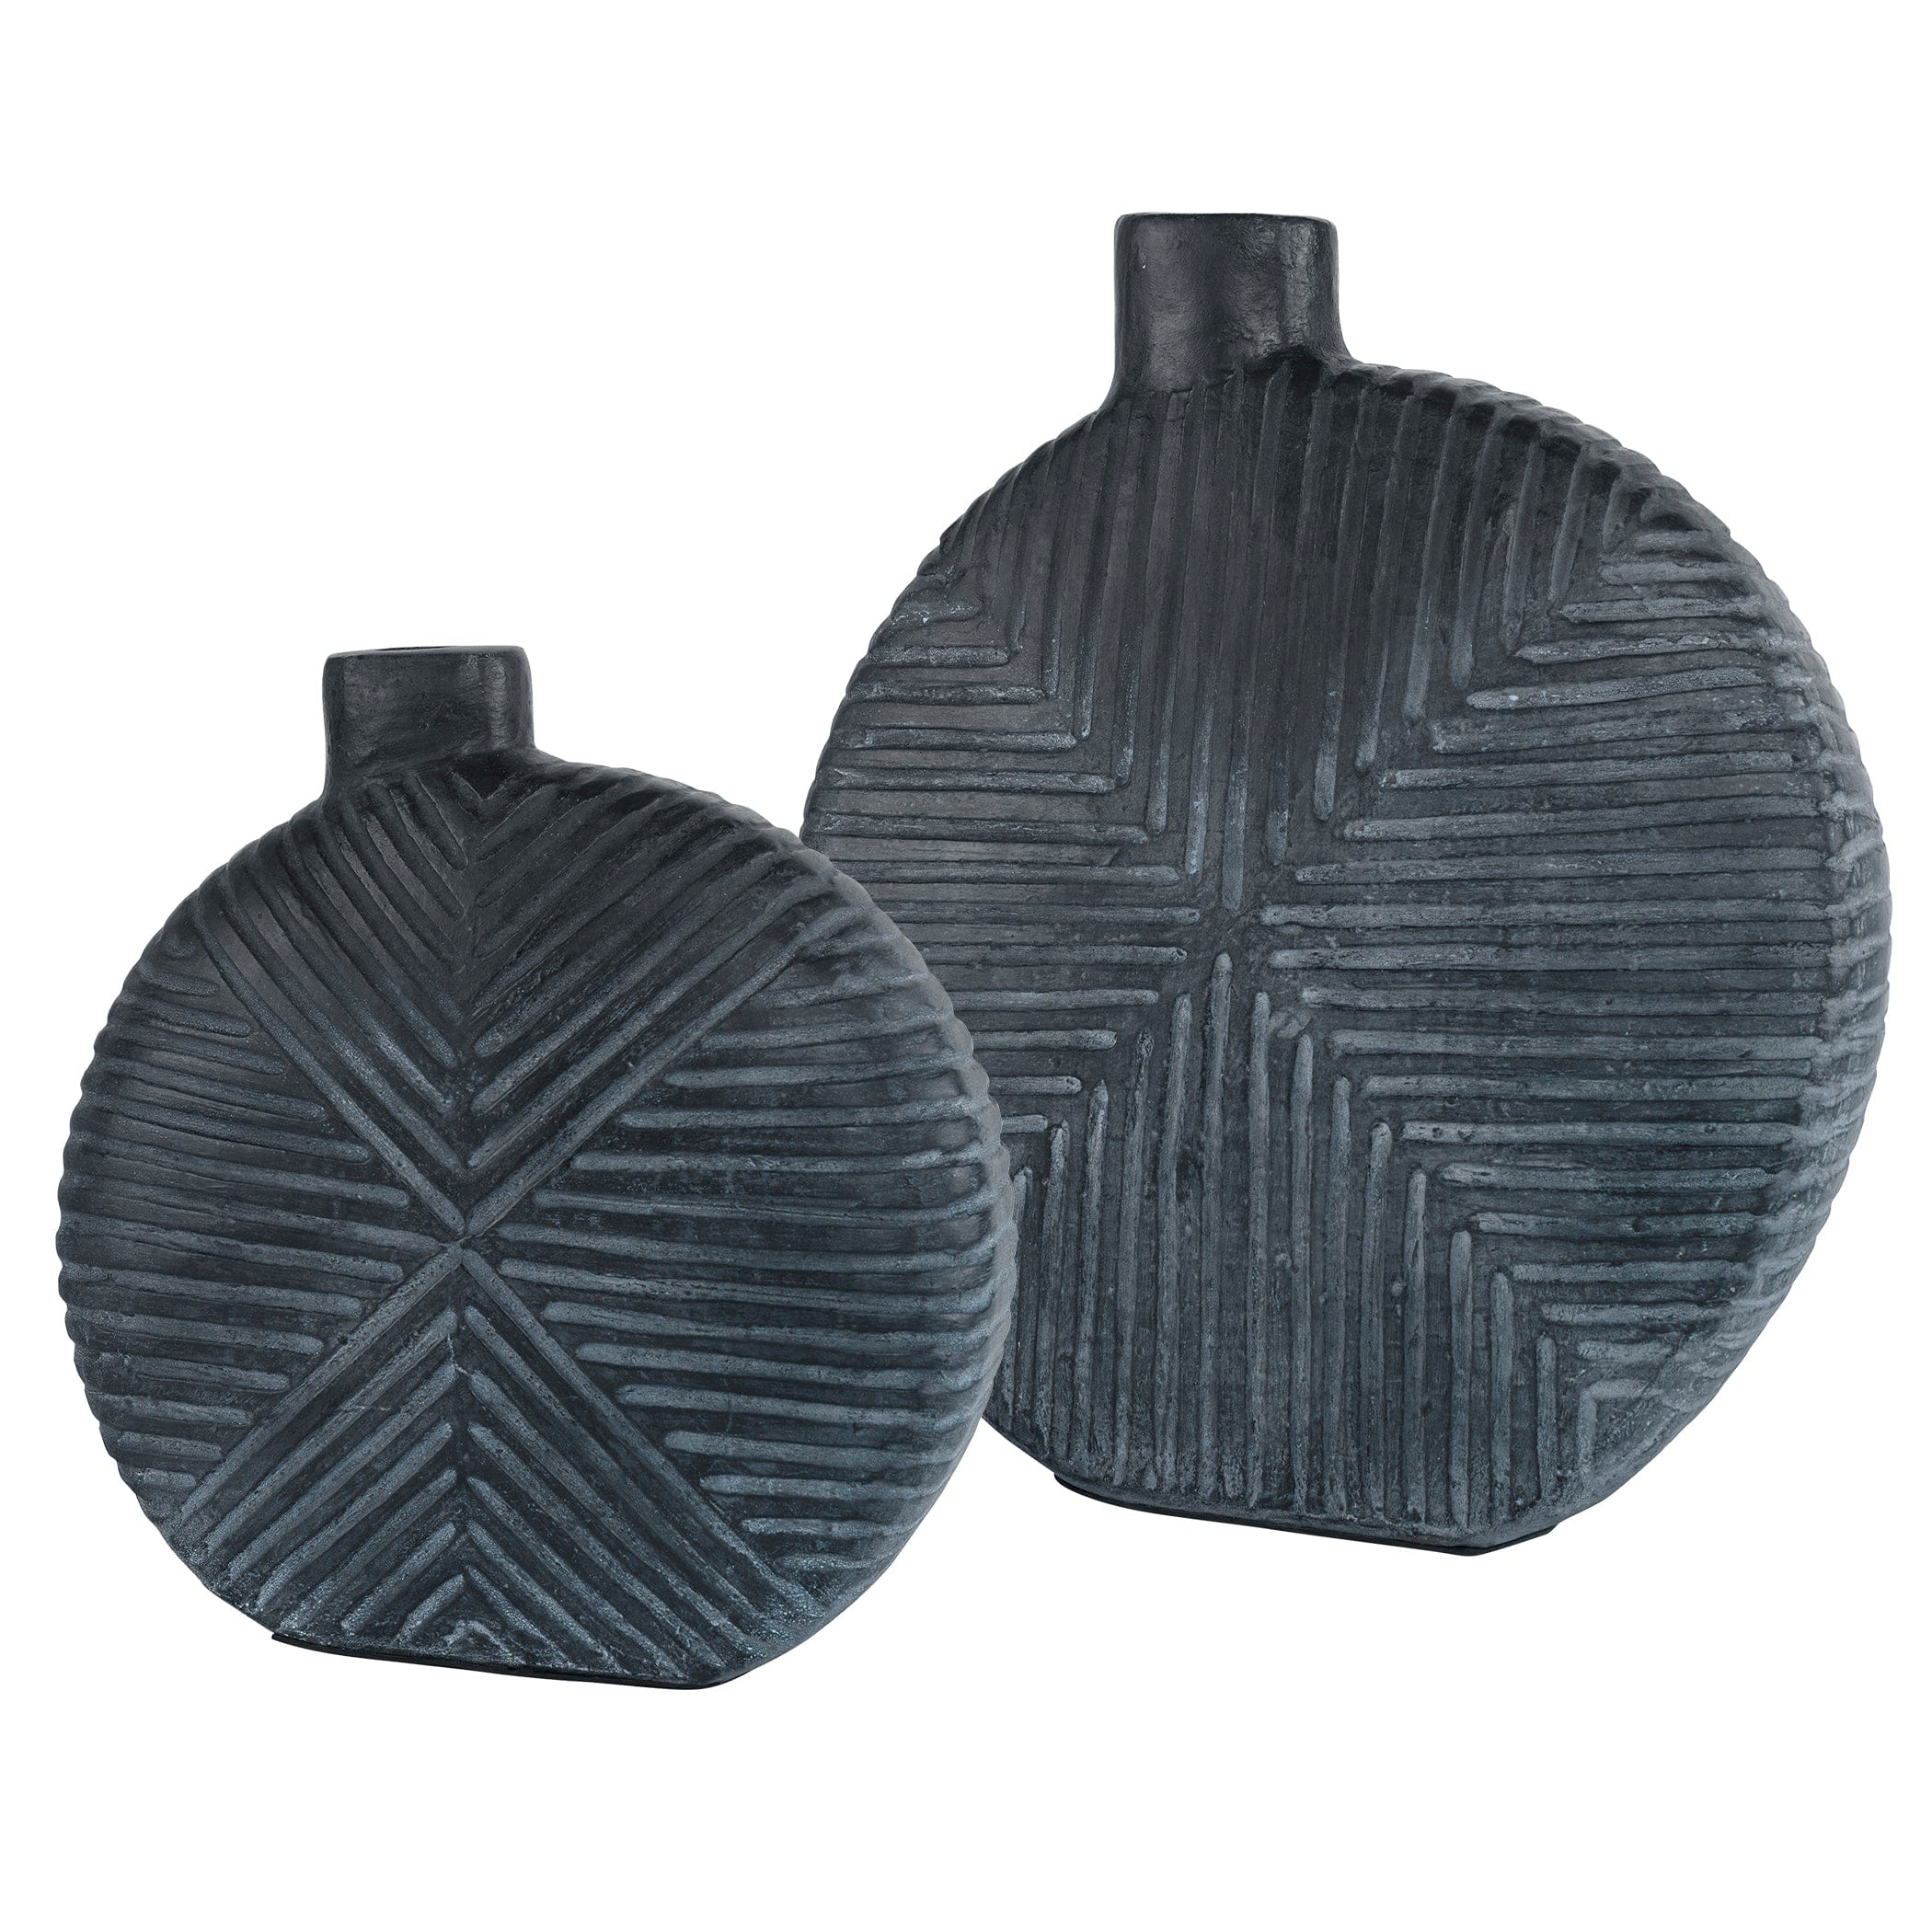 Viewpoint Aged Black Vases, Set/2 Uttermost